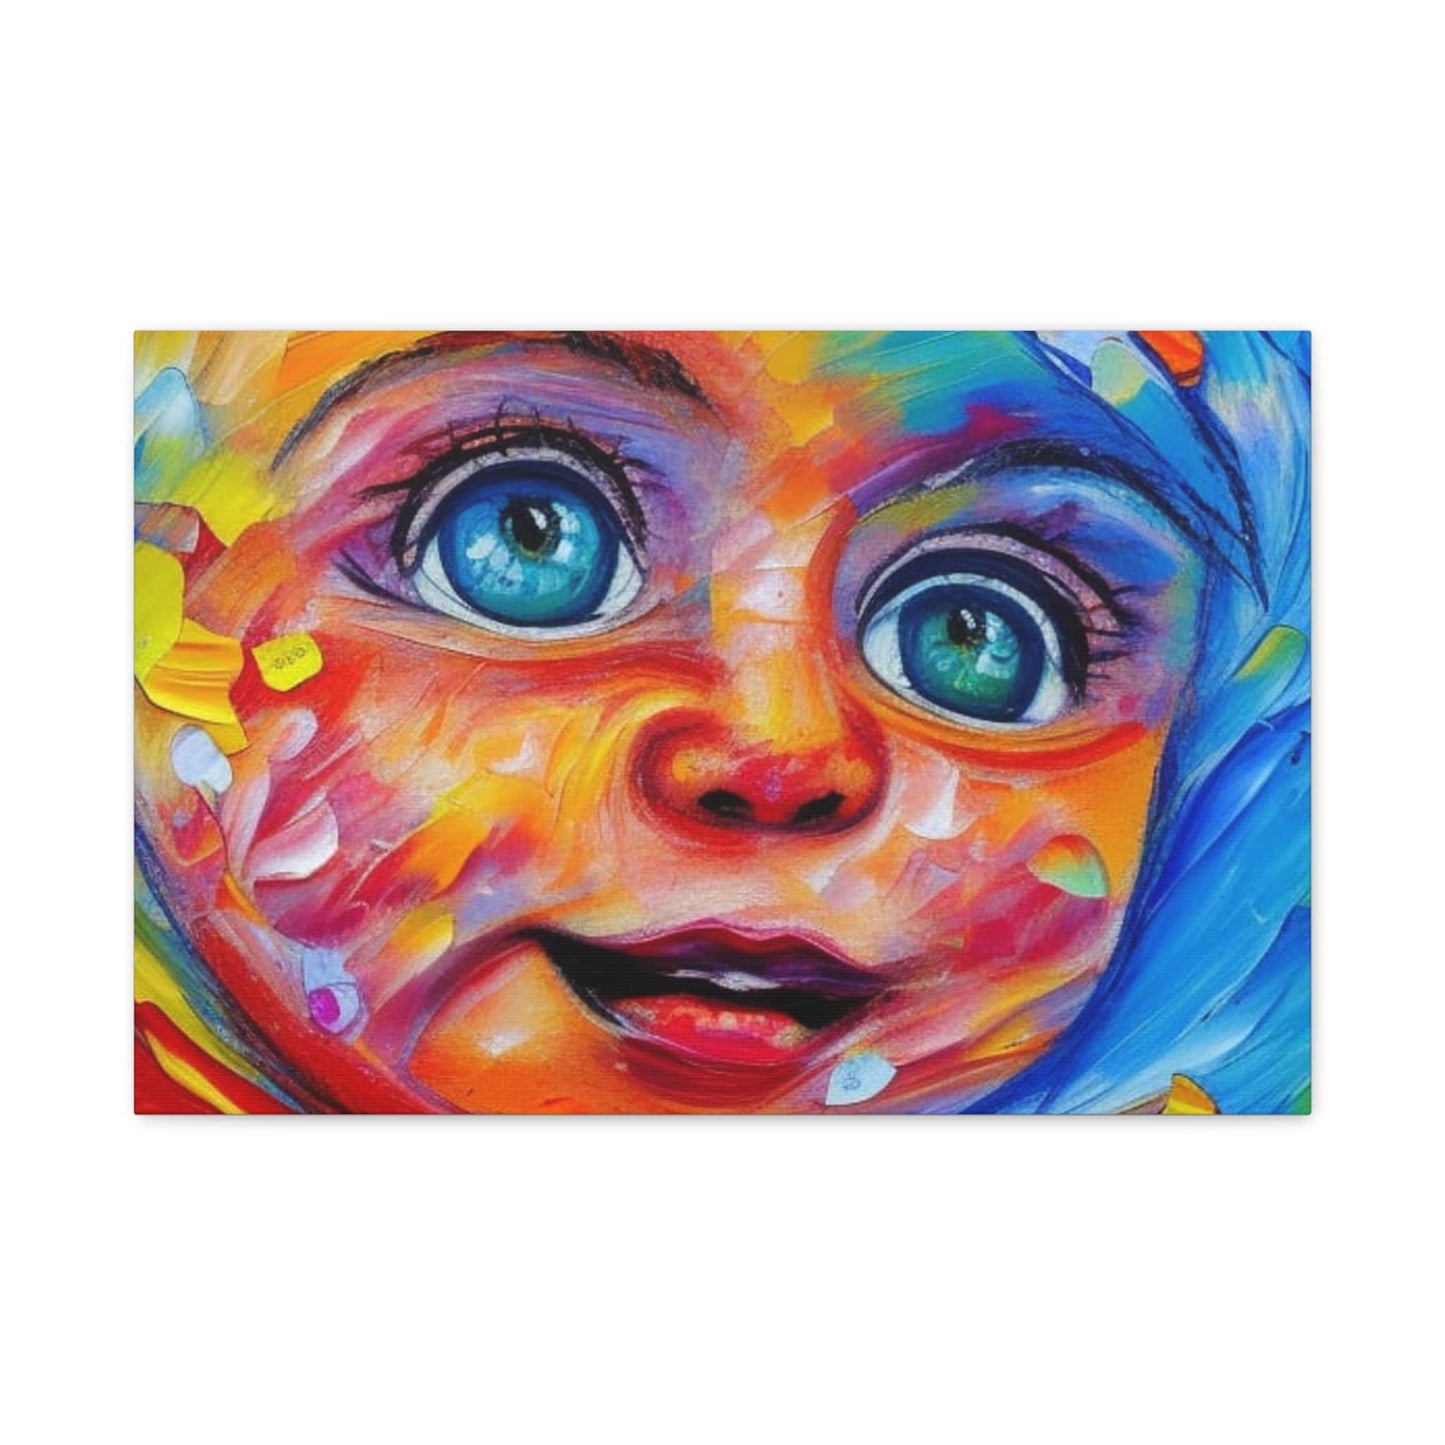 Cute Smiling Baby Canvas Art, Colorful Canvas Art, Cute Baby Poster, Gift, Framed Canvas Artwork, Colorful Poster